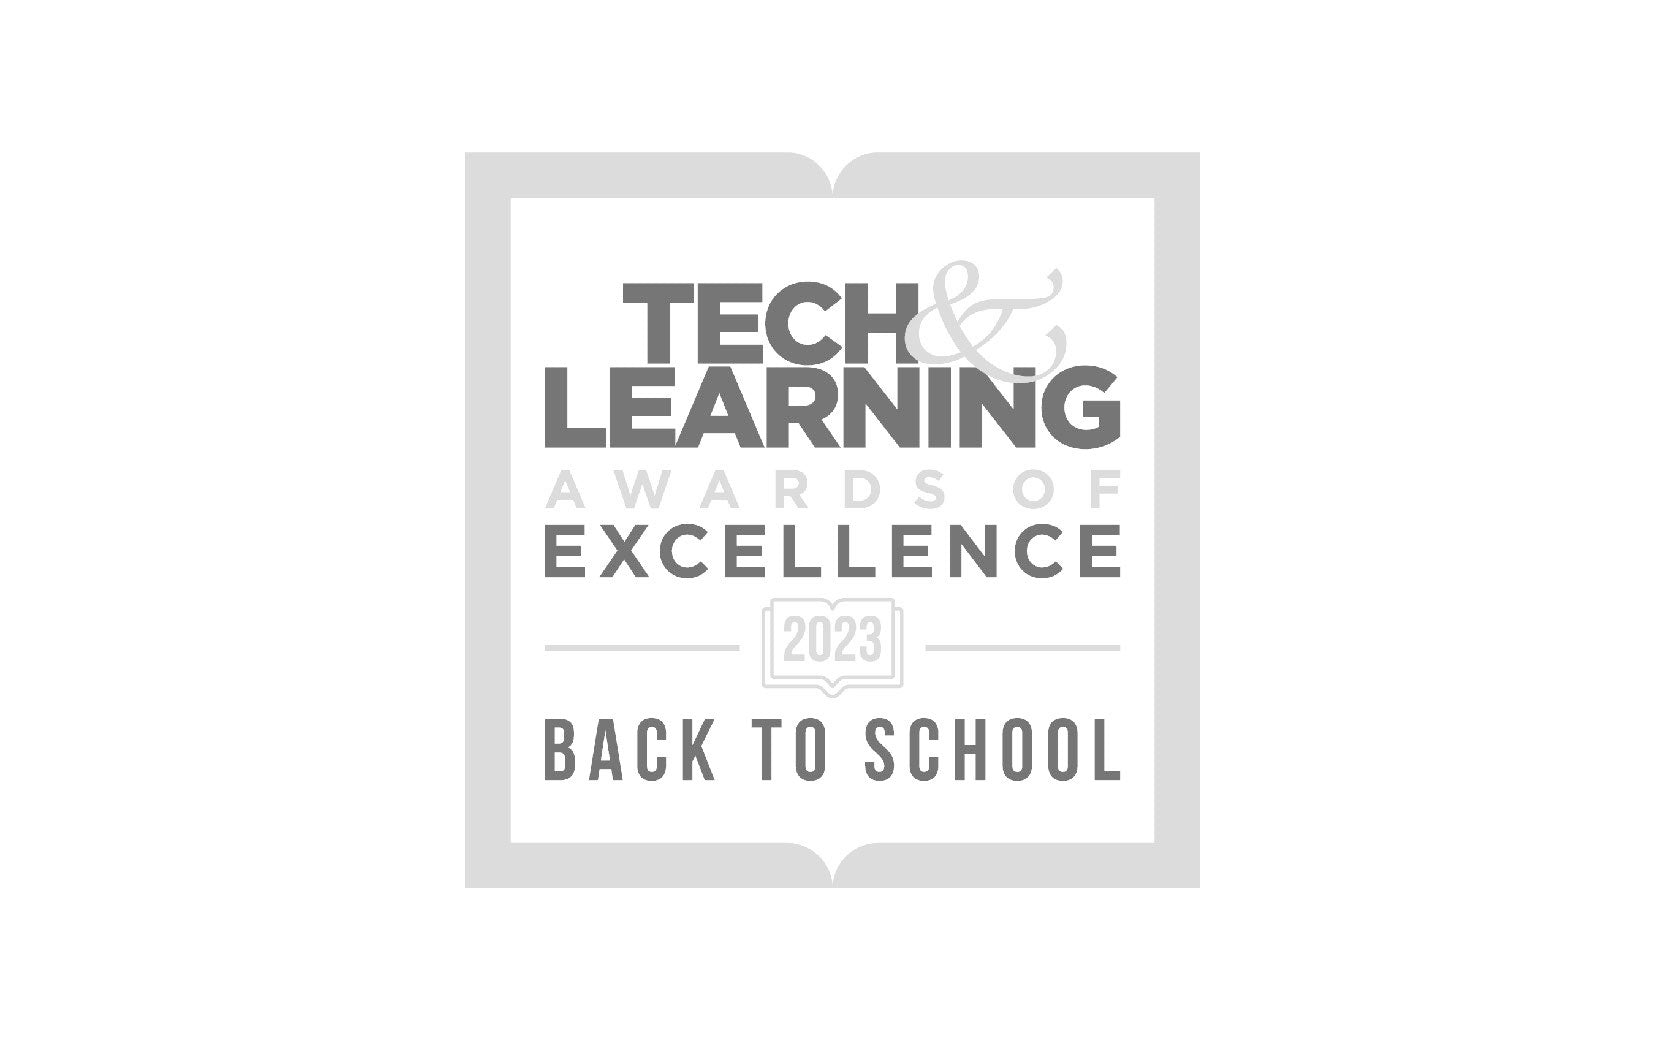 Tech & Learning Awards of Excellence Back to School 2023